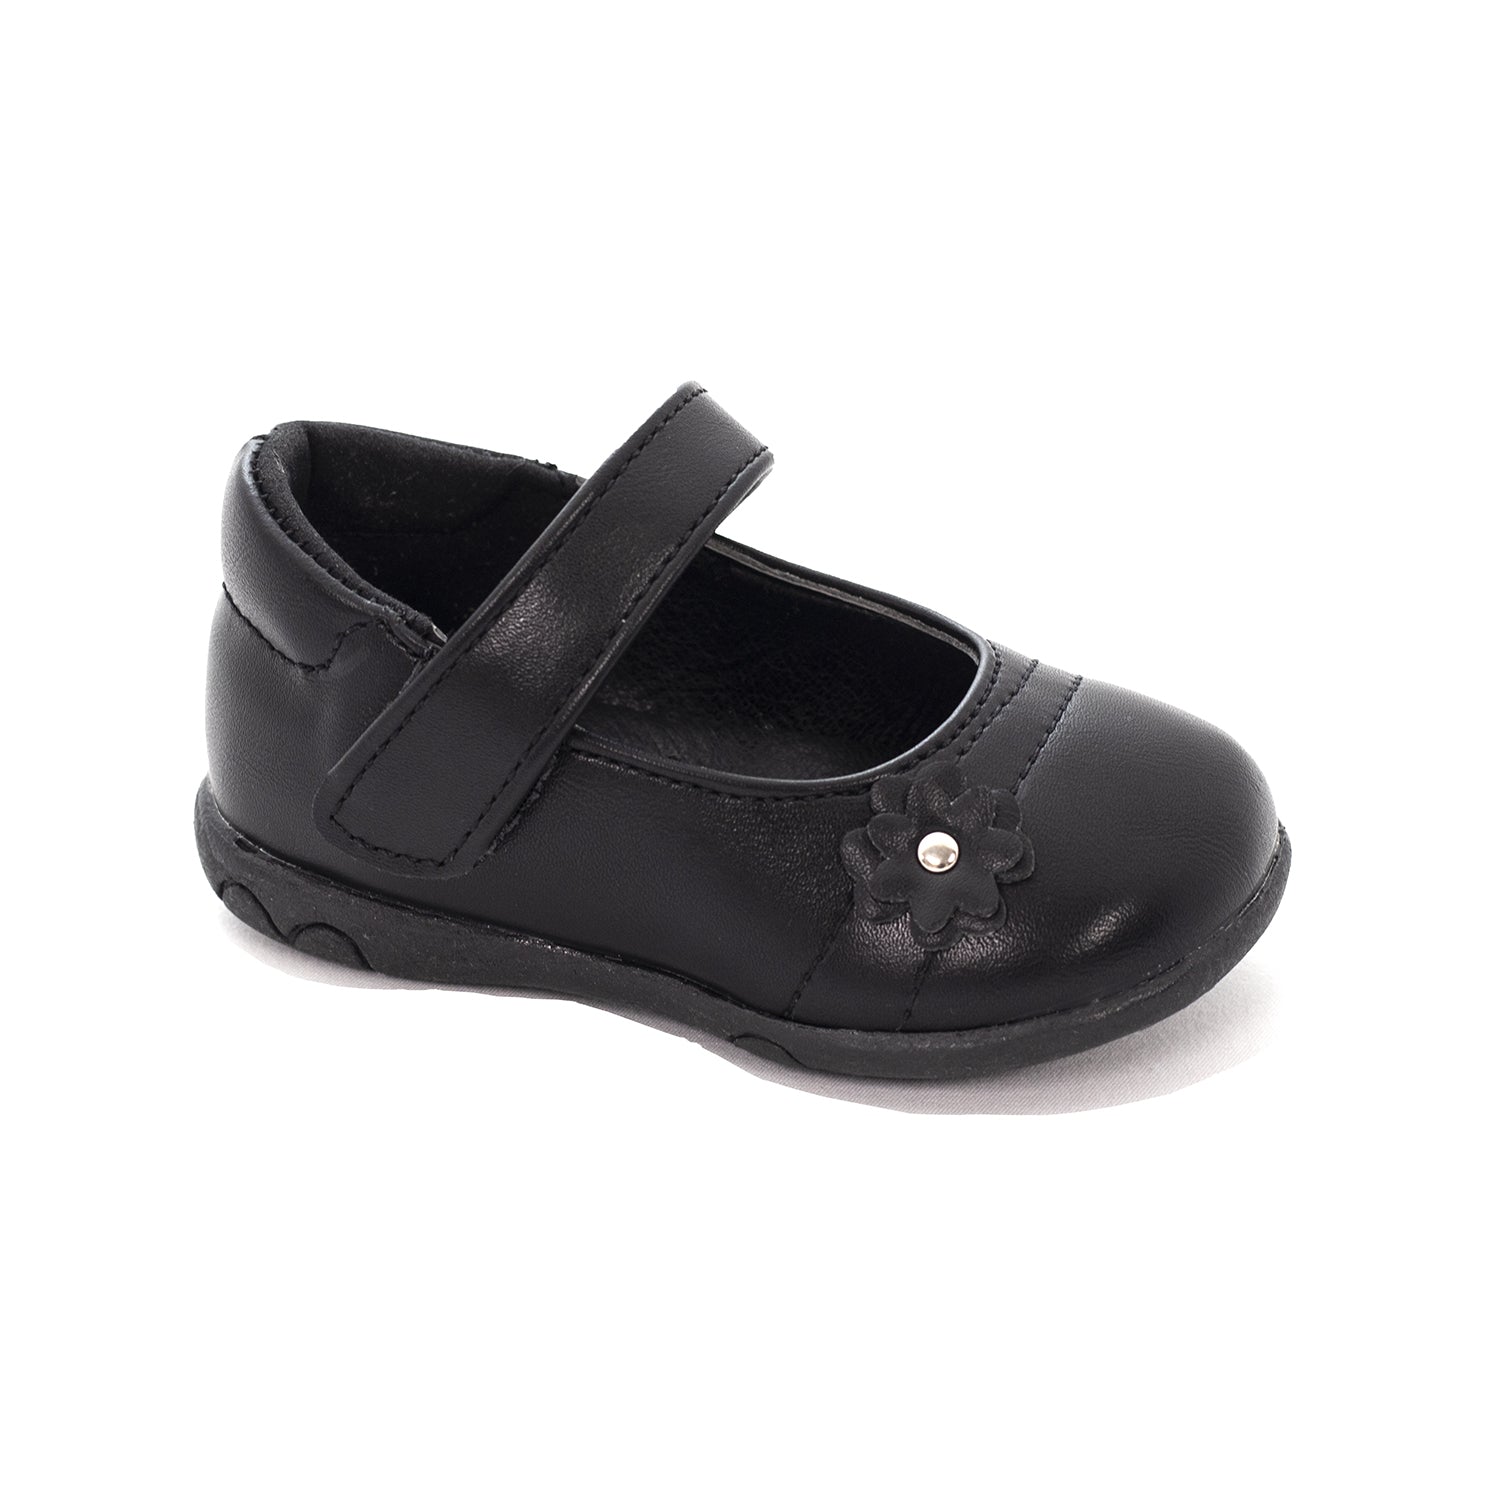 Wholesale GENUINE LEATHER loafer school shoes child boy kids other